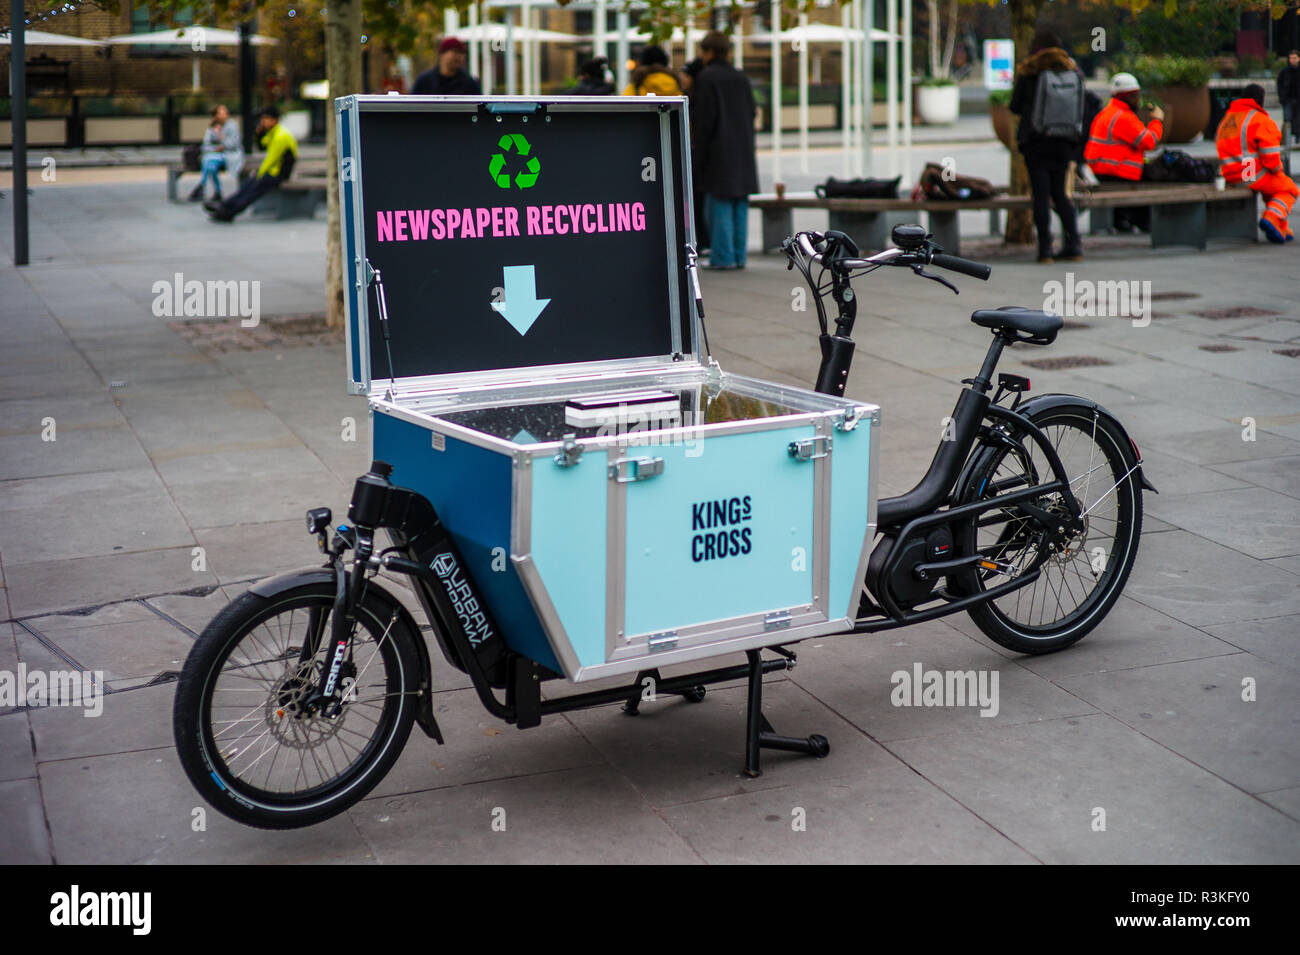 Newspaper Recycling Scheme London - Cargo Bike for recycling newspapers outside Kings Cross Station in Central London UK Stock Photo